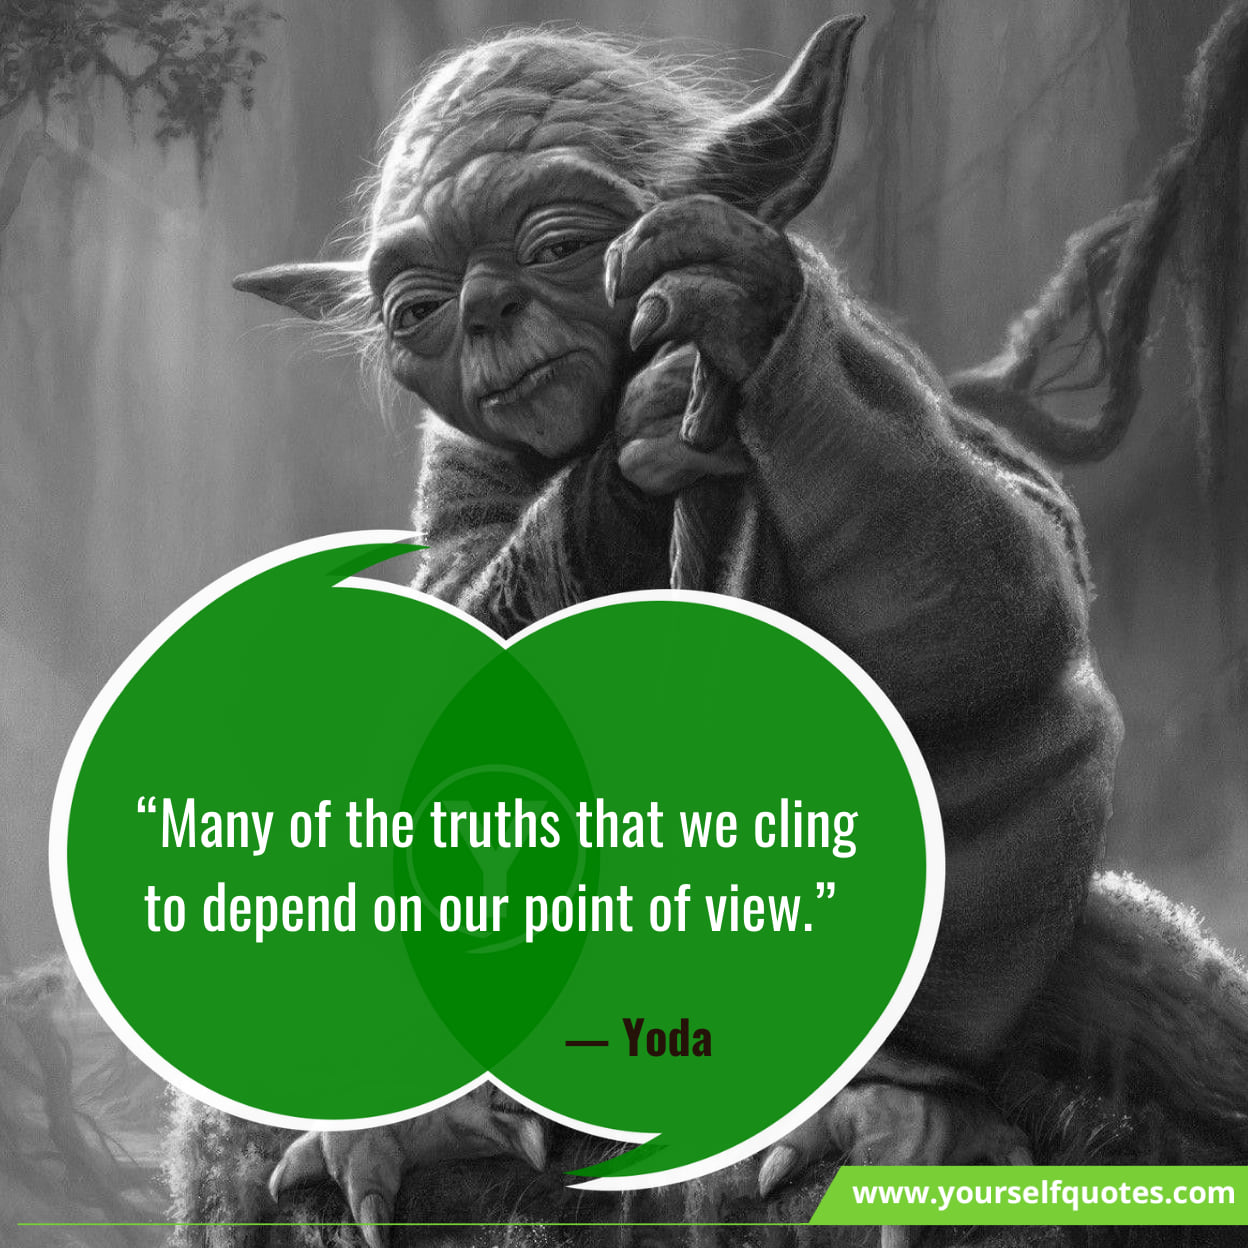 Best Yoda Quotes 